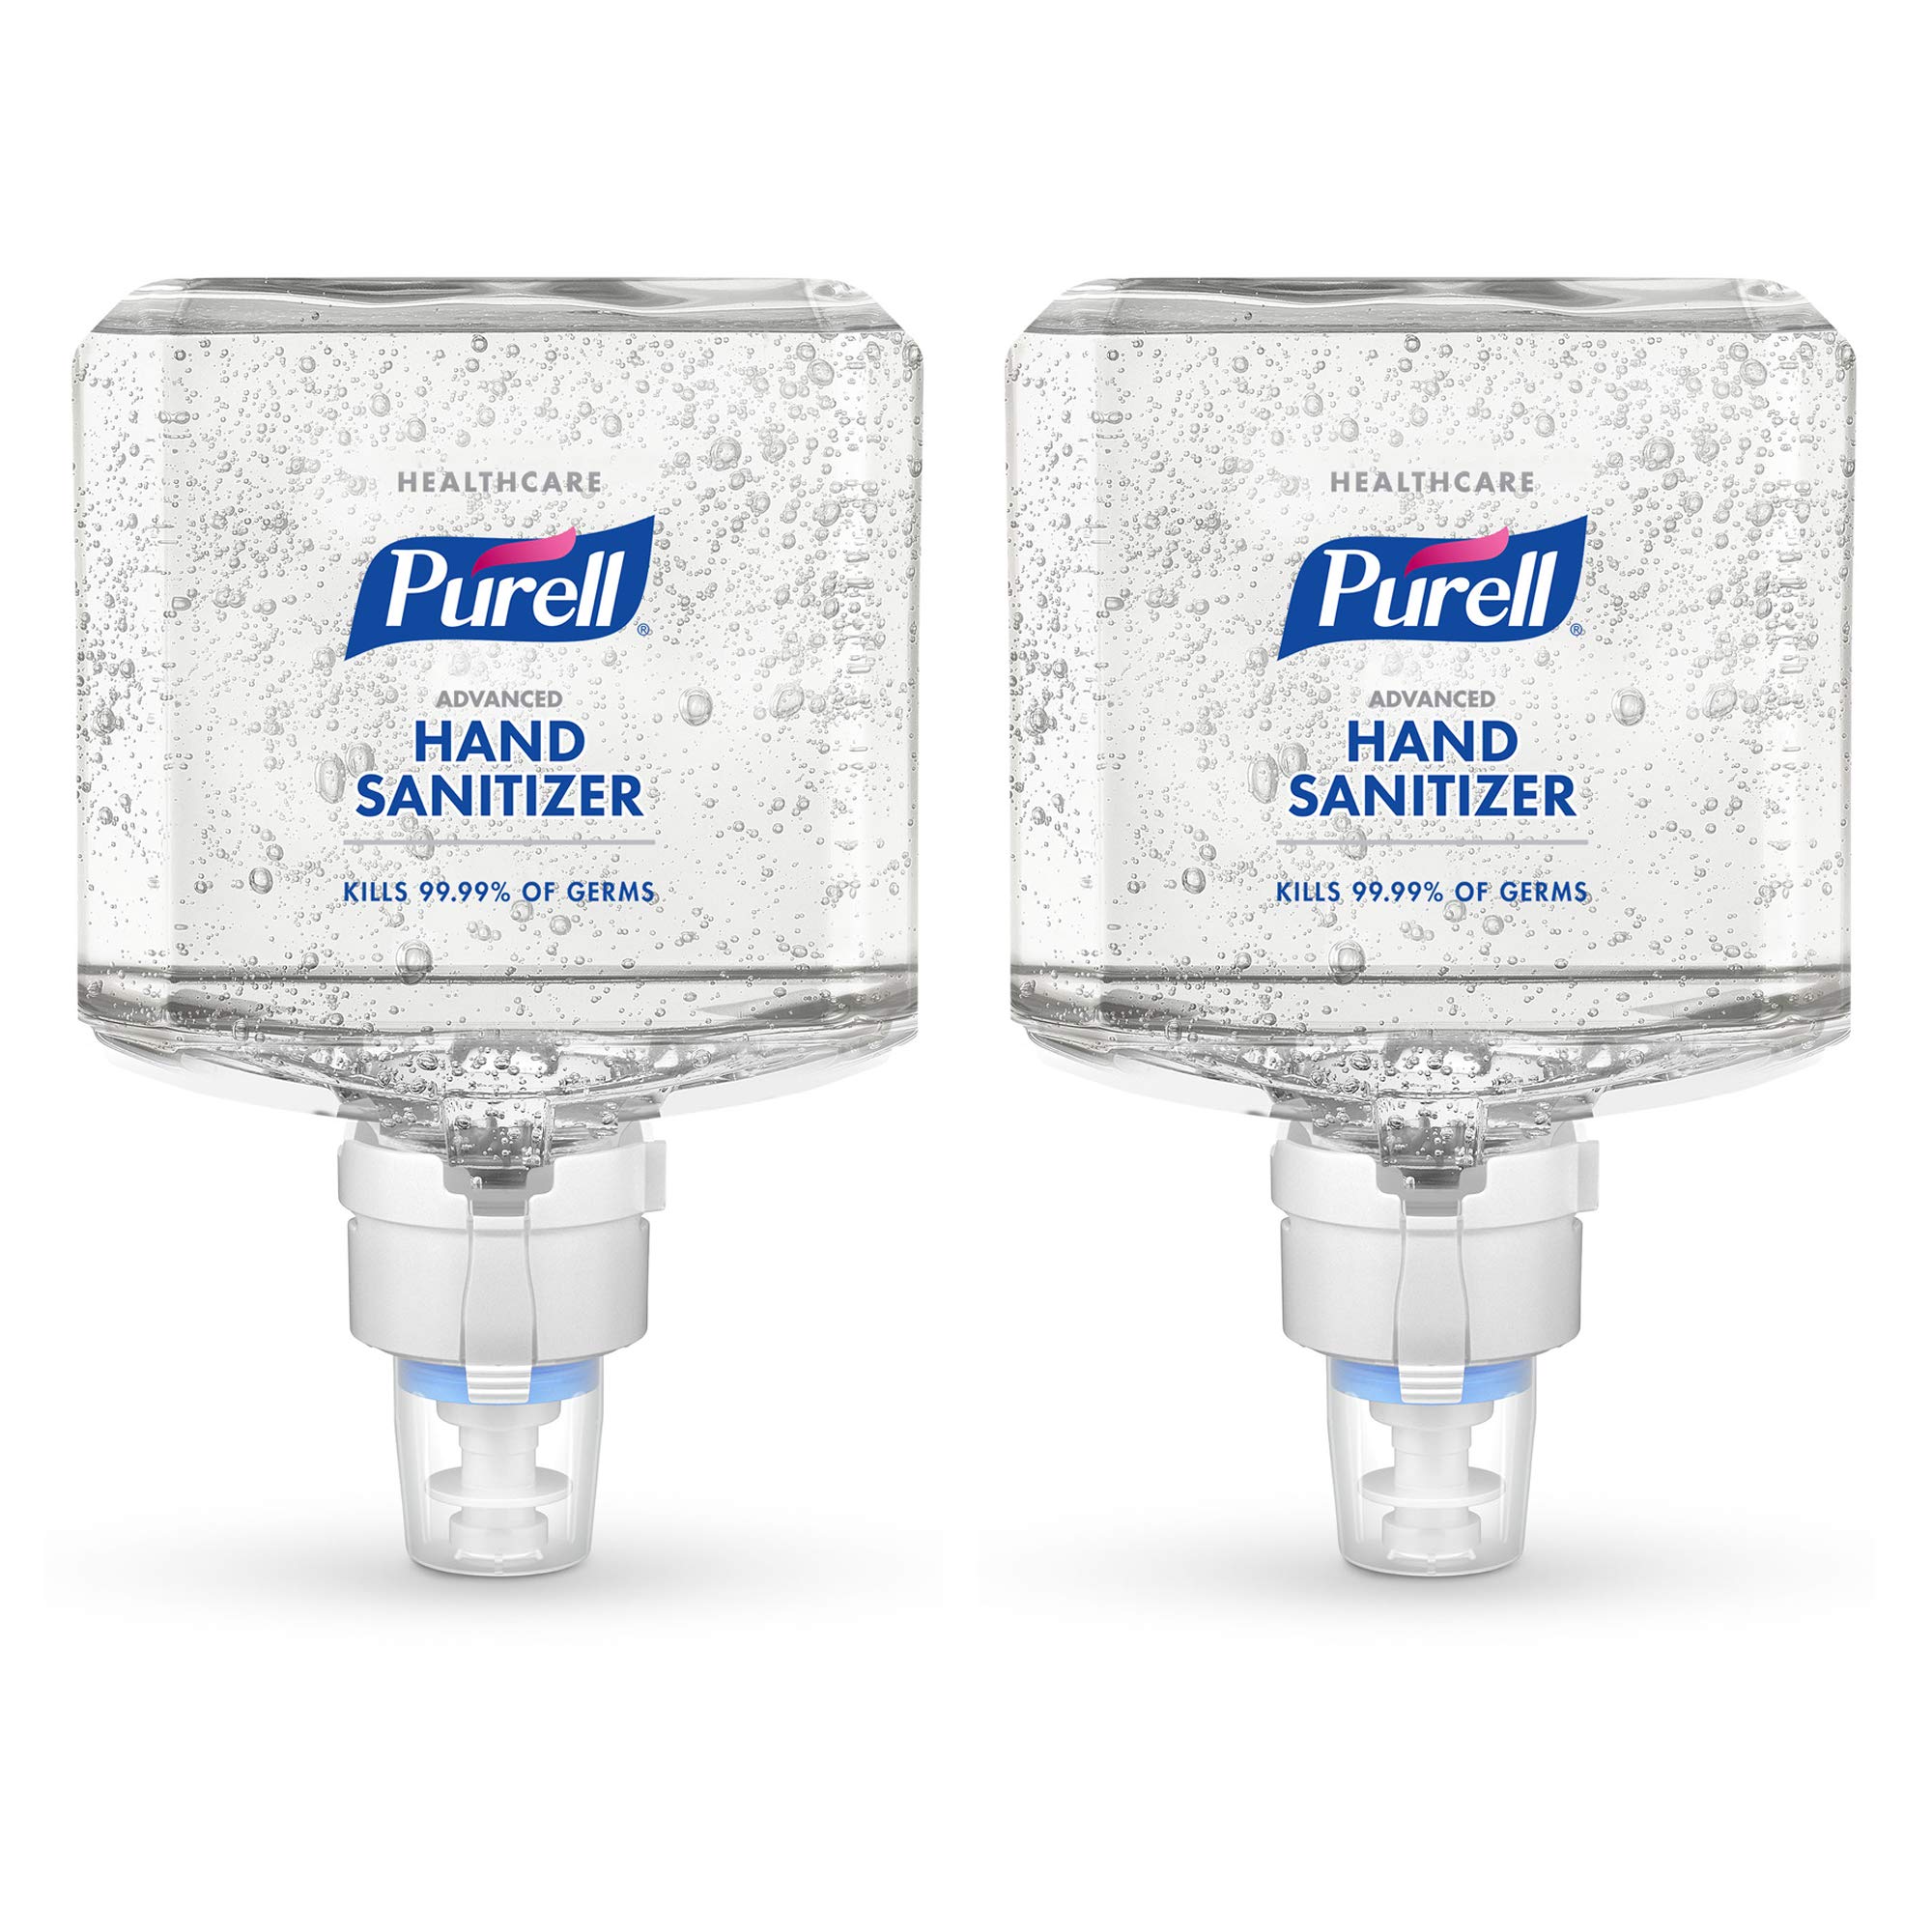 PURELL Healthcare Advanced Hand Sanitizer Gel, 1200 mL Sanitizer Refill for PURELL ES8 Touch-Free Hand Sanitizer Dispenser (Pack of 2) - 7763-02